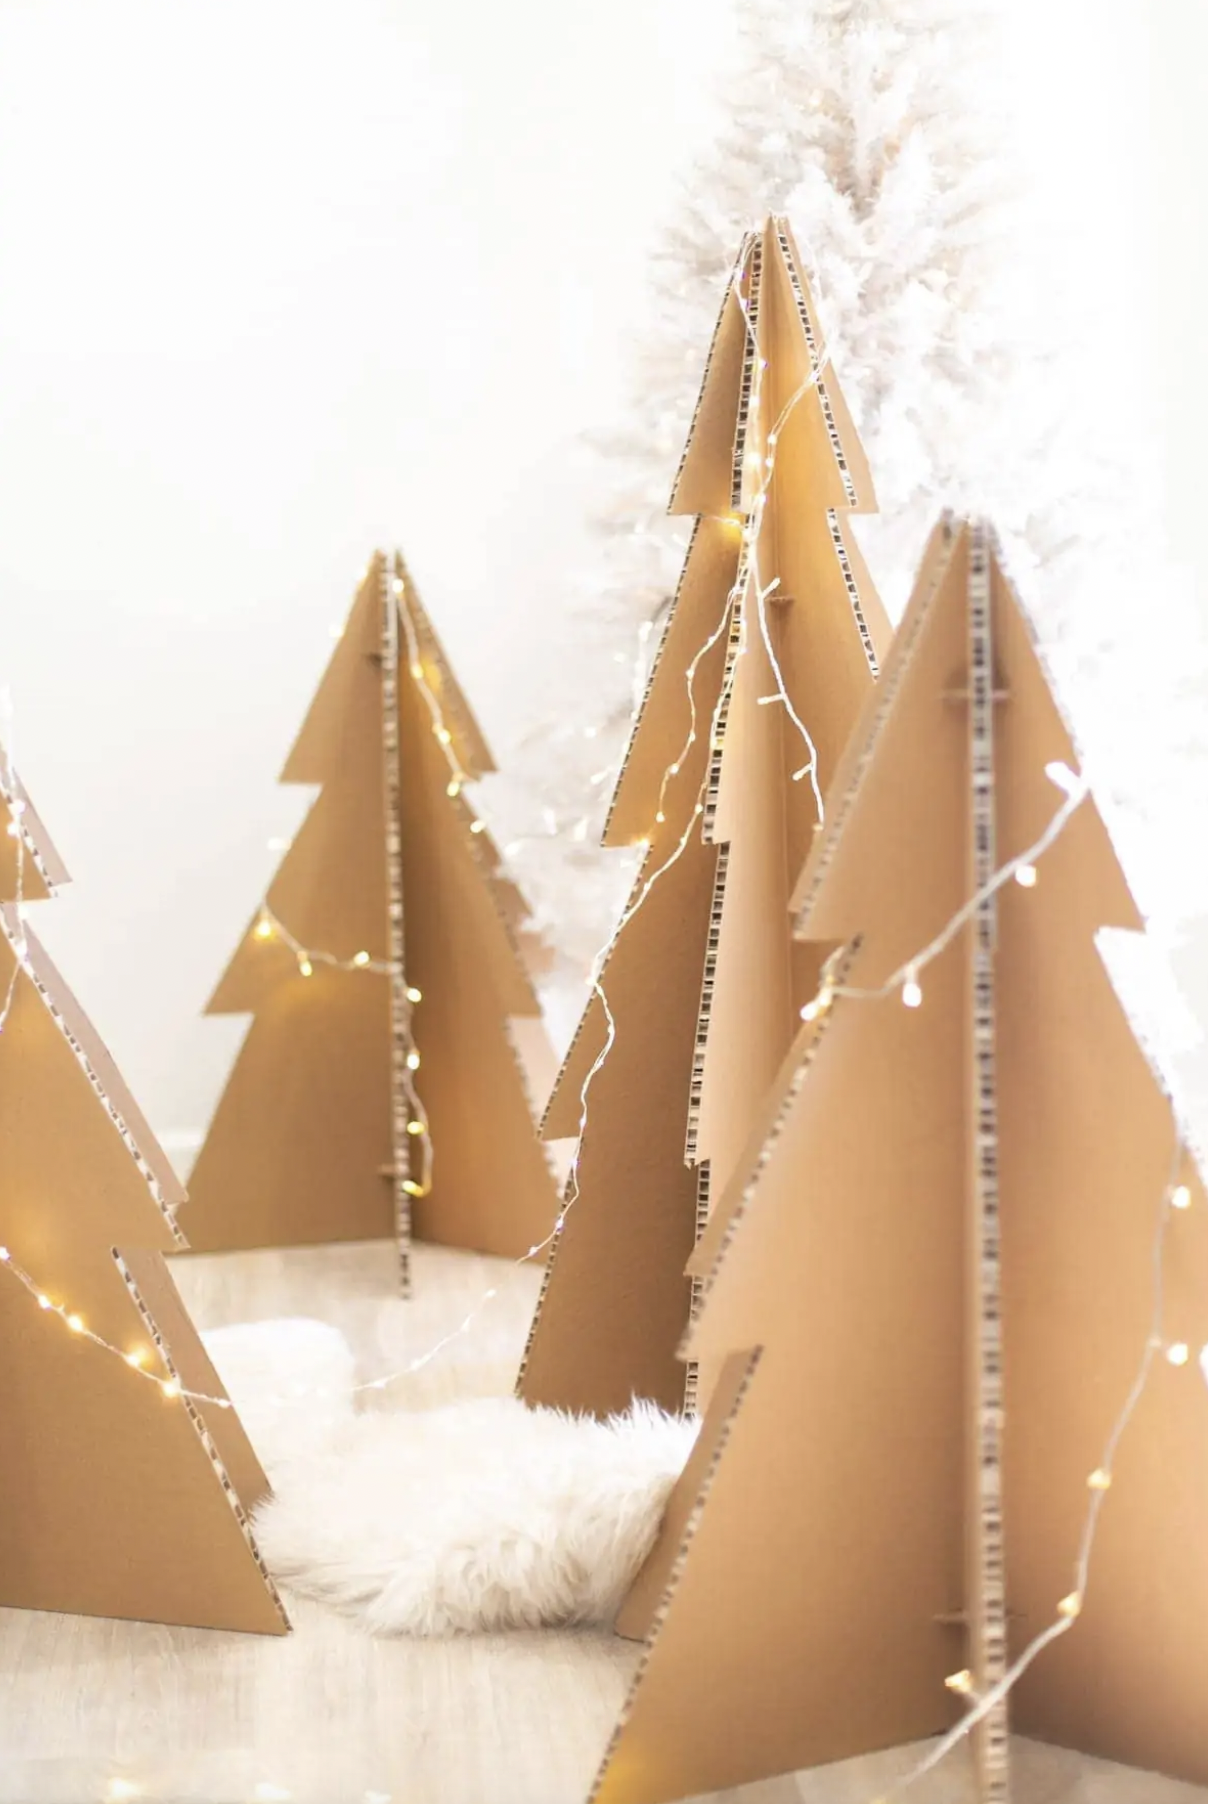 12 Pcs DIY Christmas ornaments material Cardboard Cones for Crafts